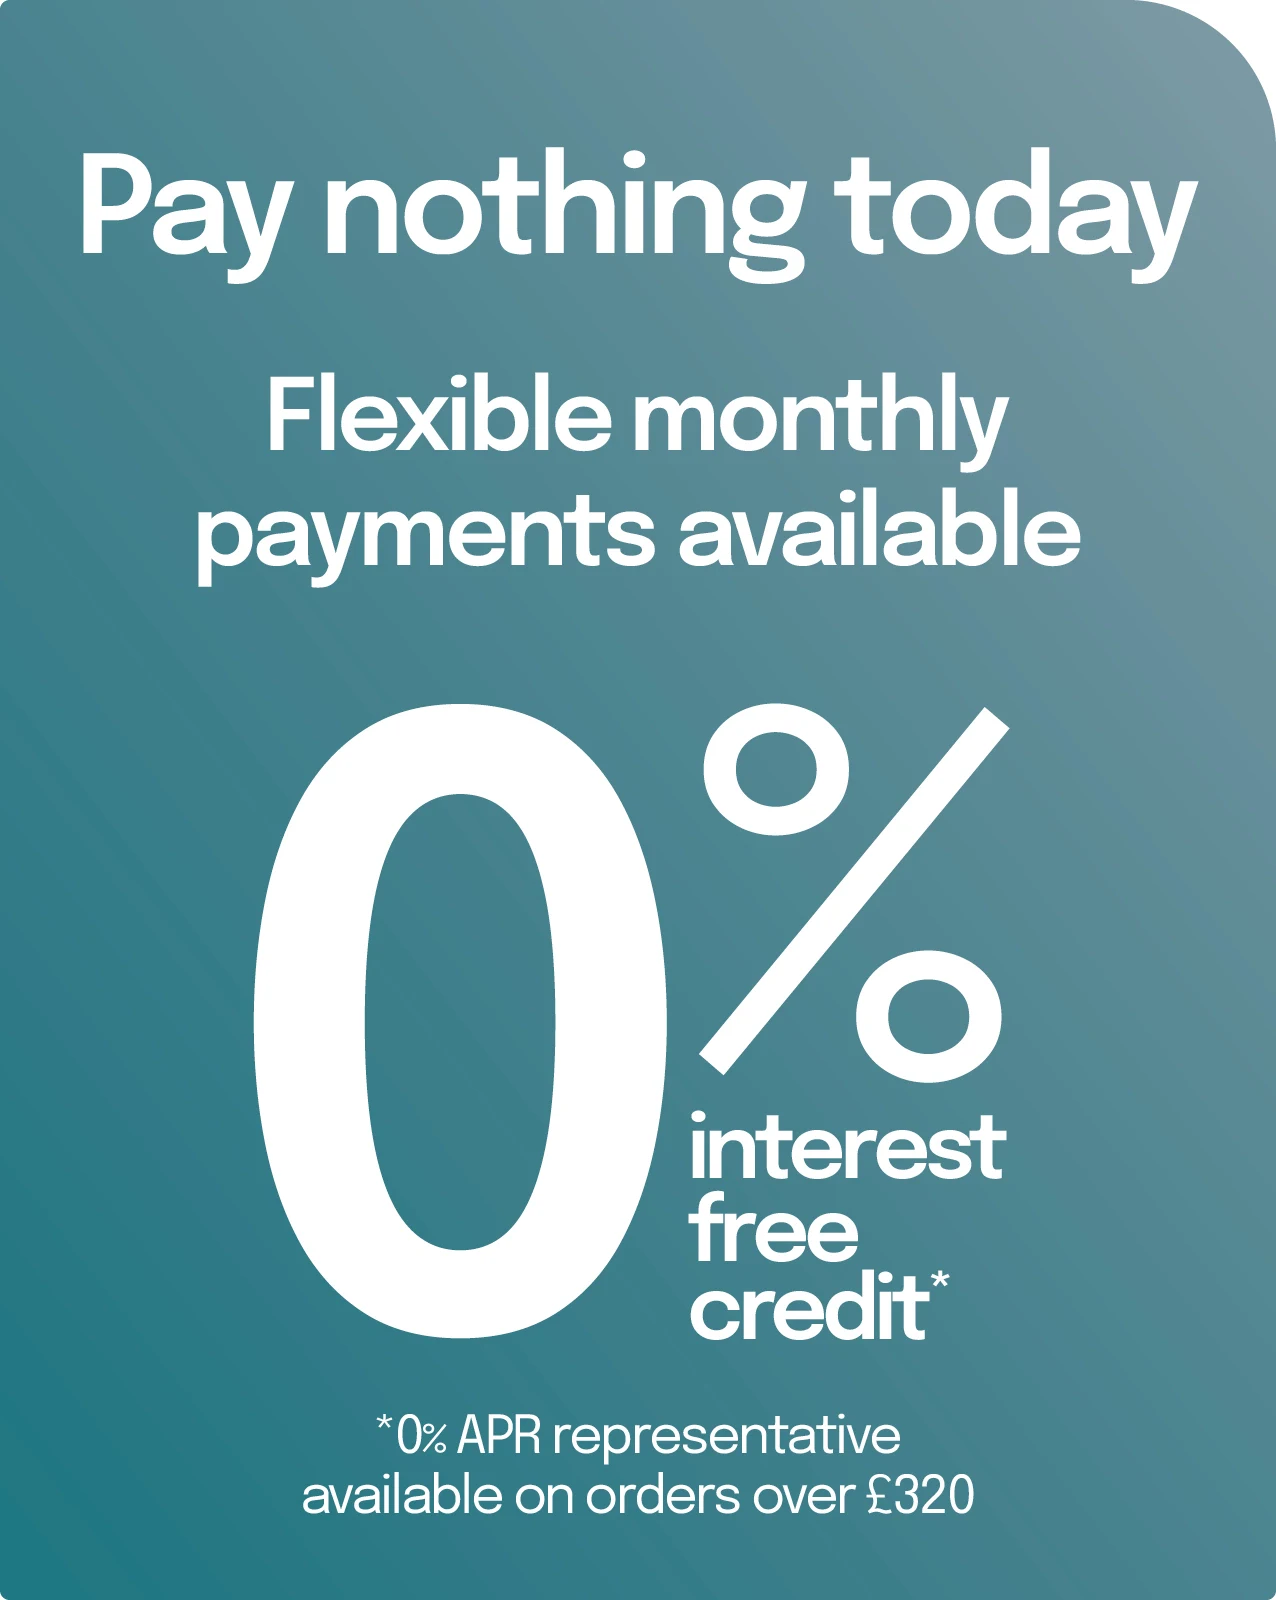 3 years interest free credit available - order now and pay nothing today *available on orders over £320